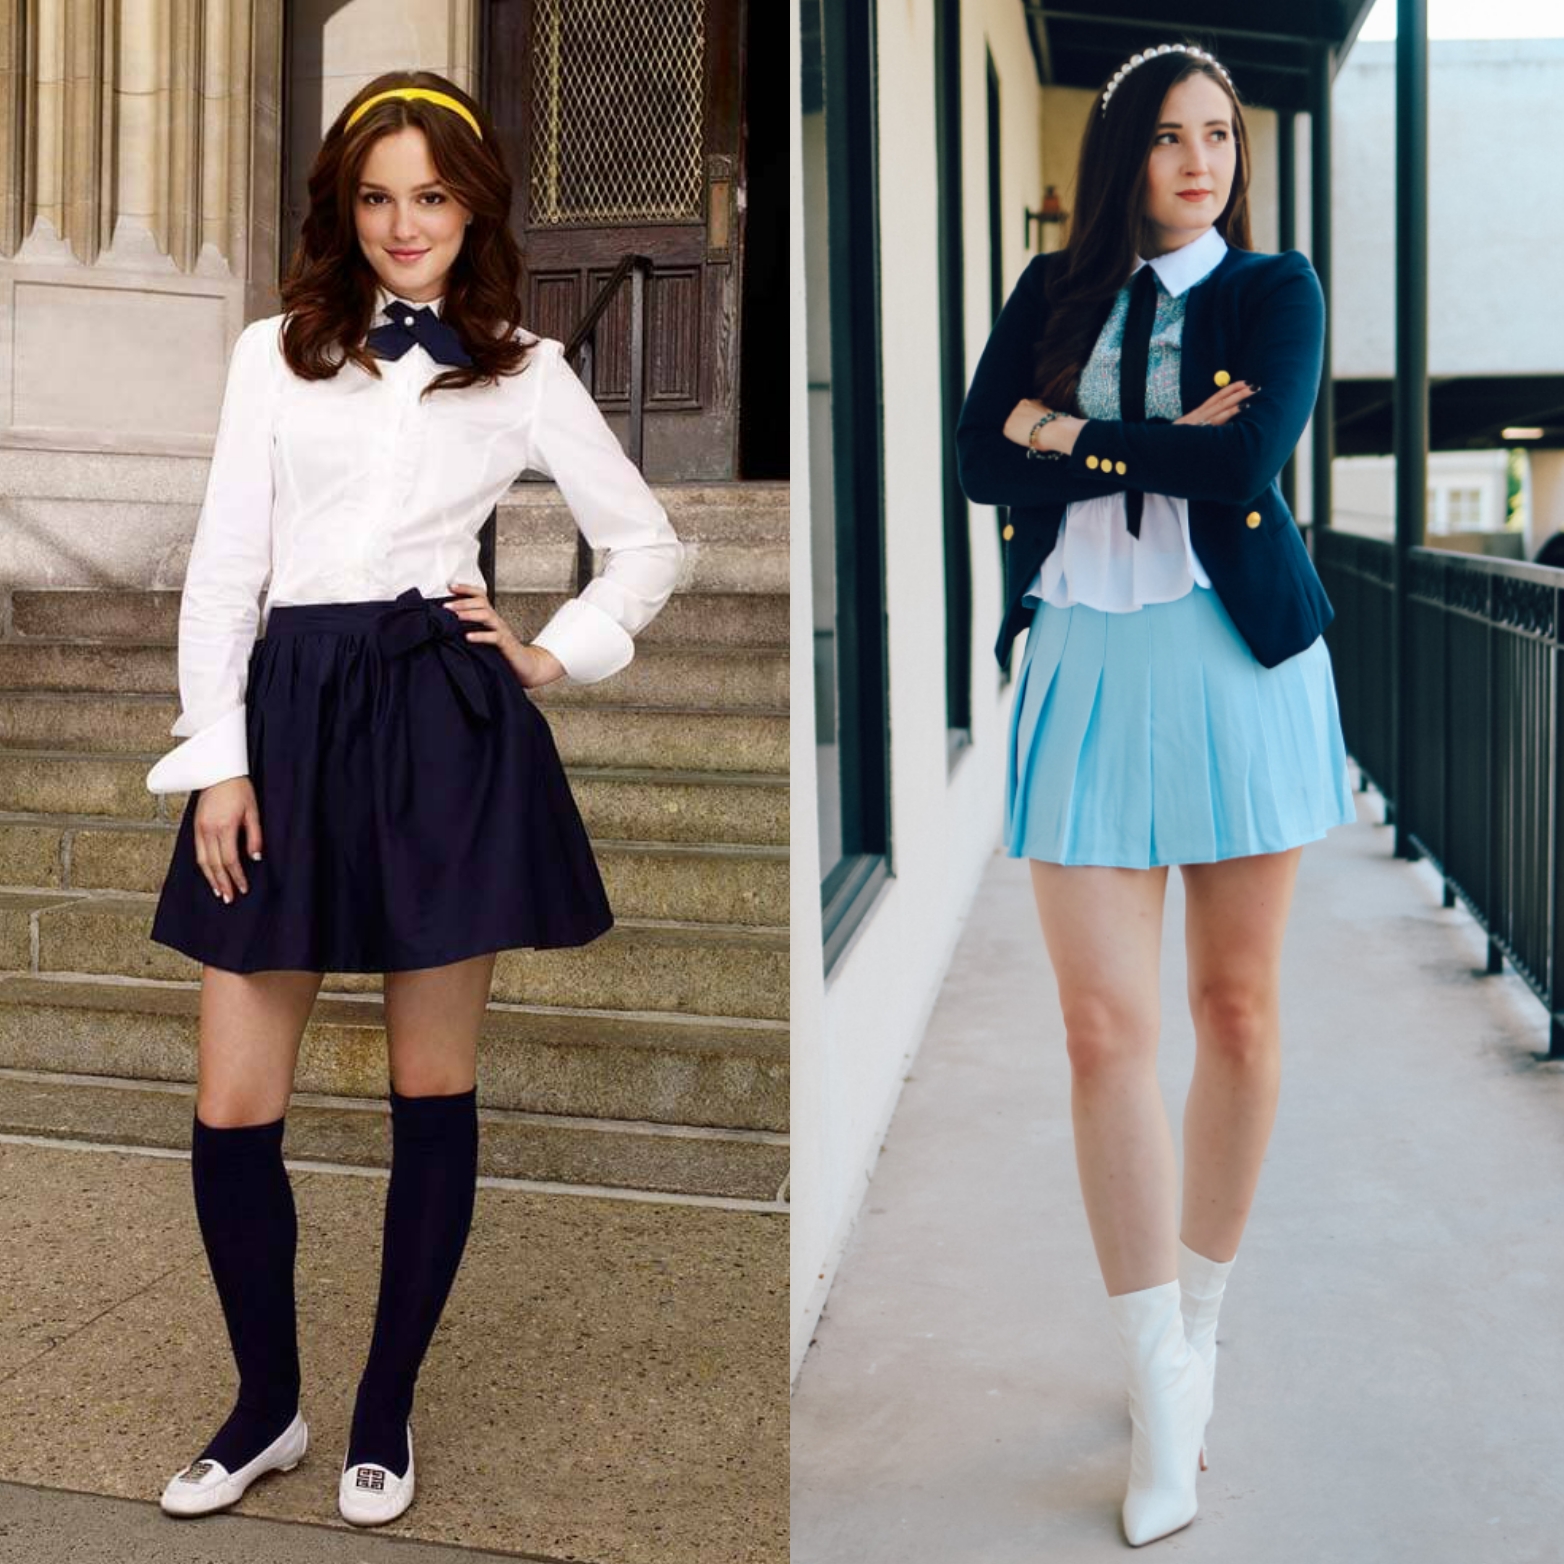 Style File: Gossip Girl Blair Waldorf - that's so yesterday